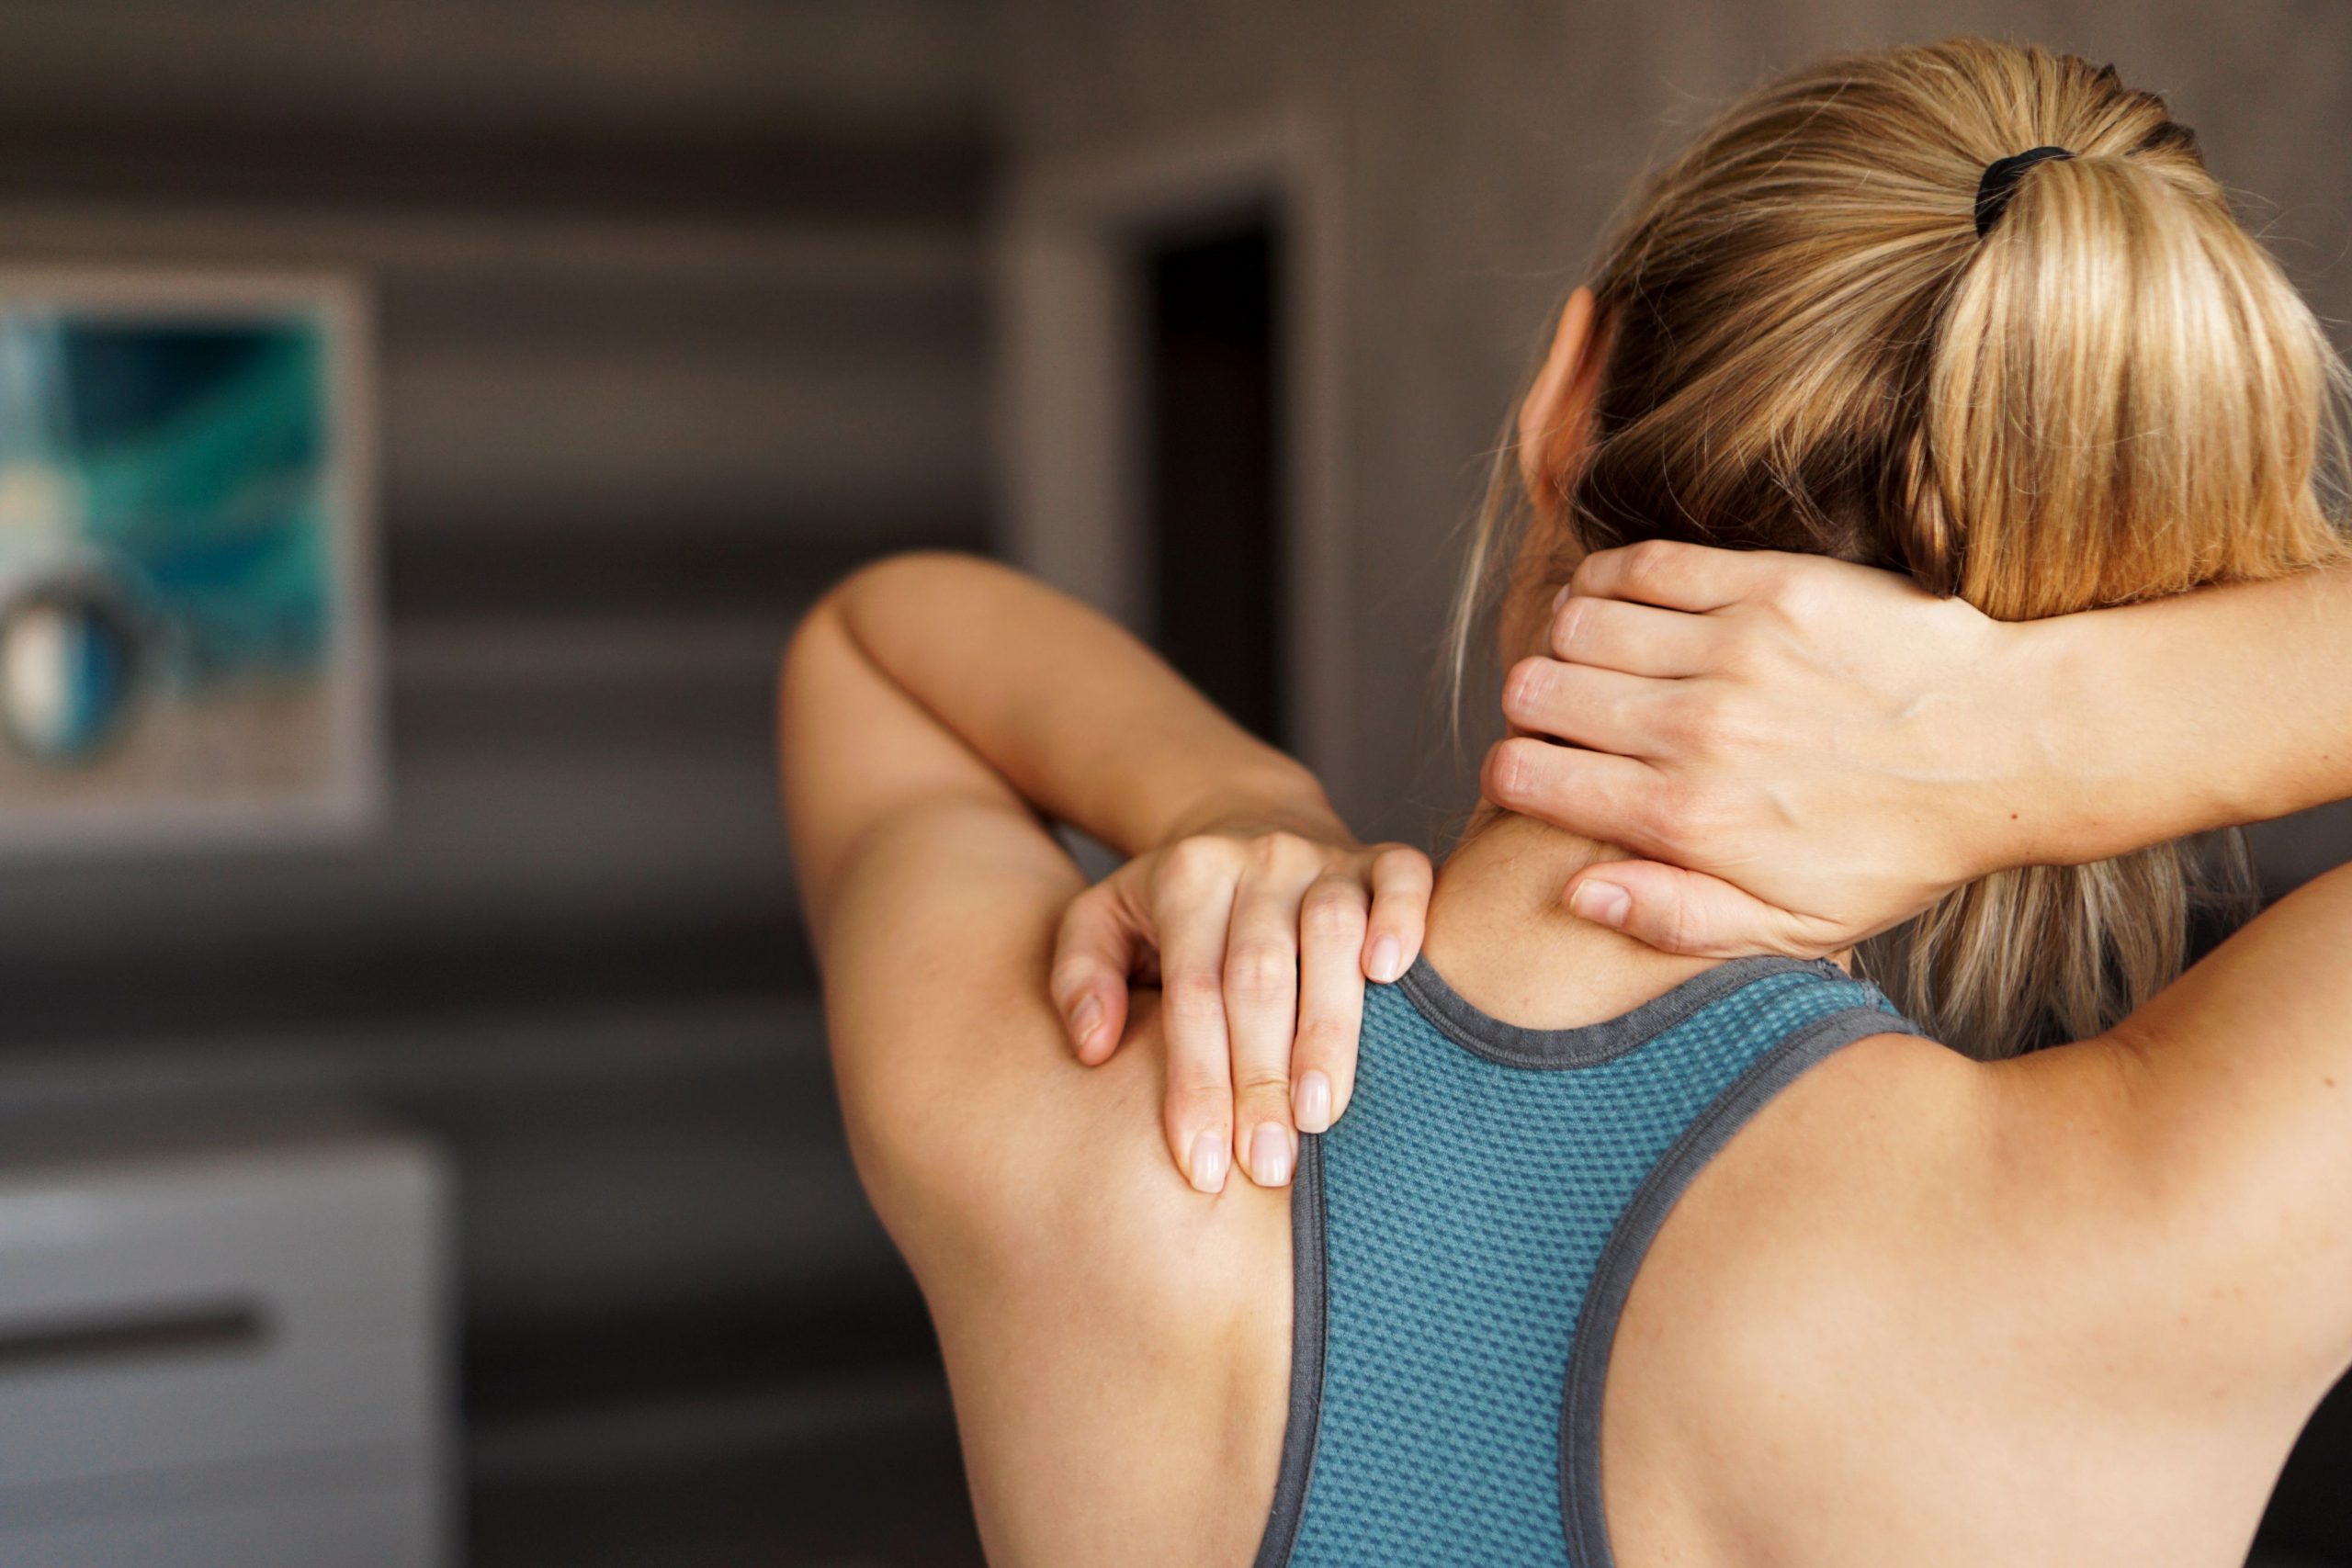 Do you have a shoulder injury?